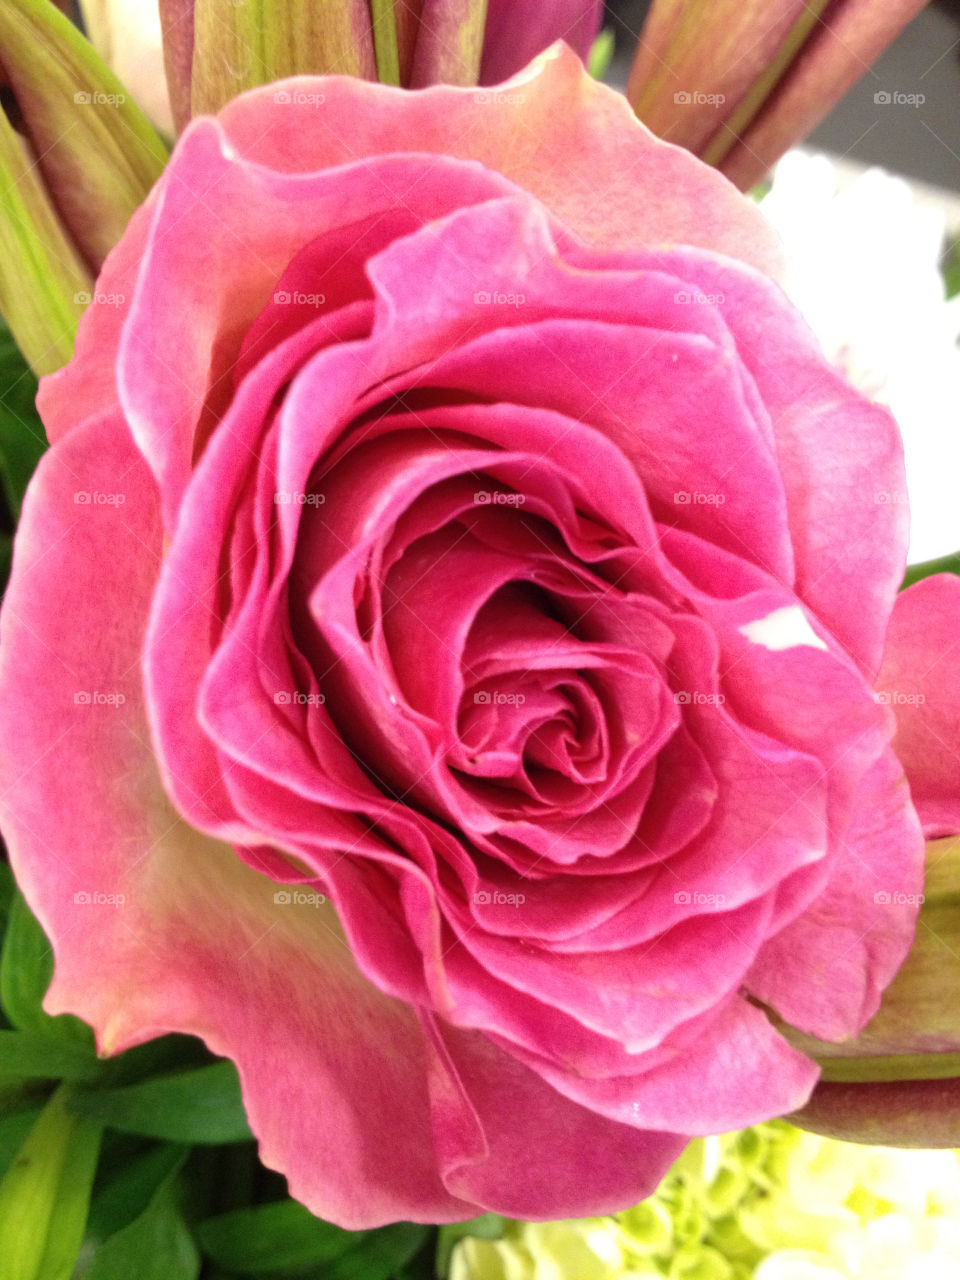 pink rose cook united states by eastofsheridan